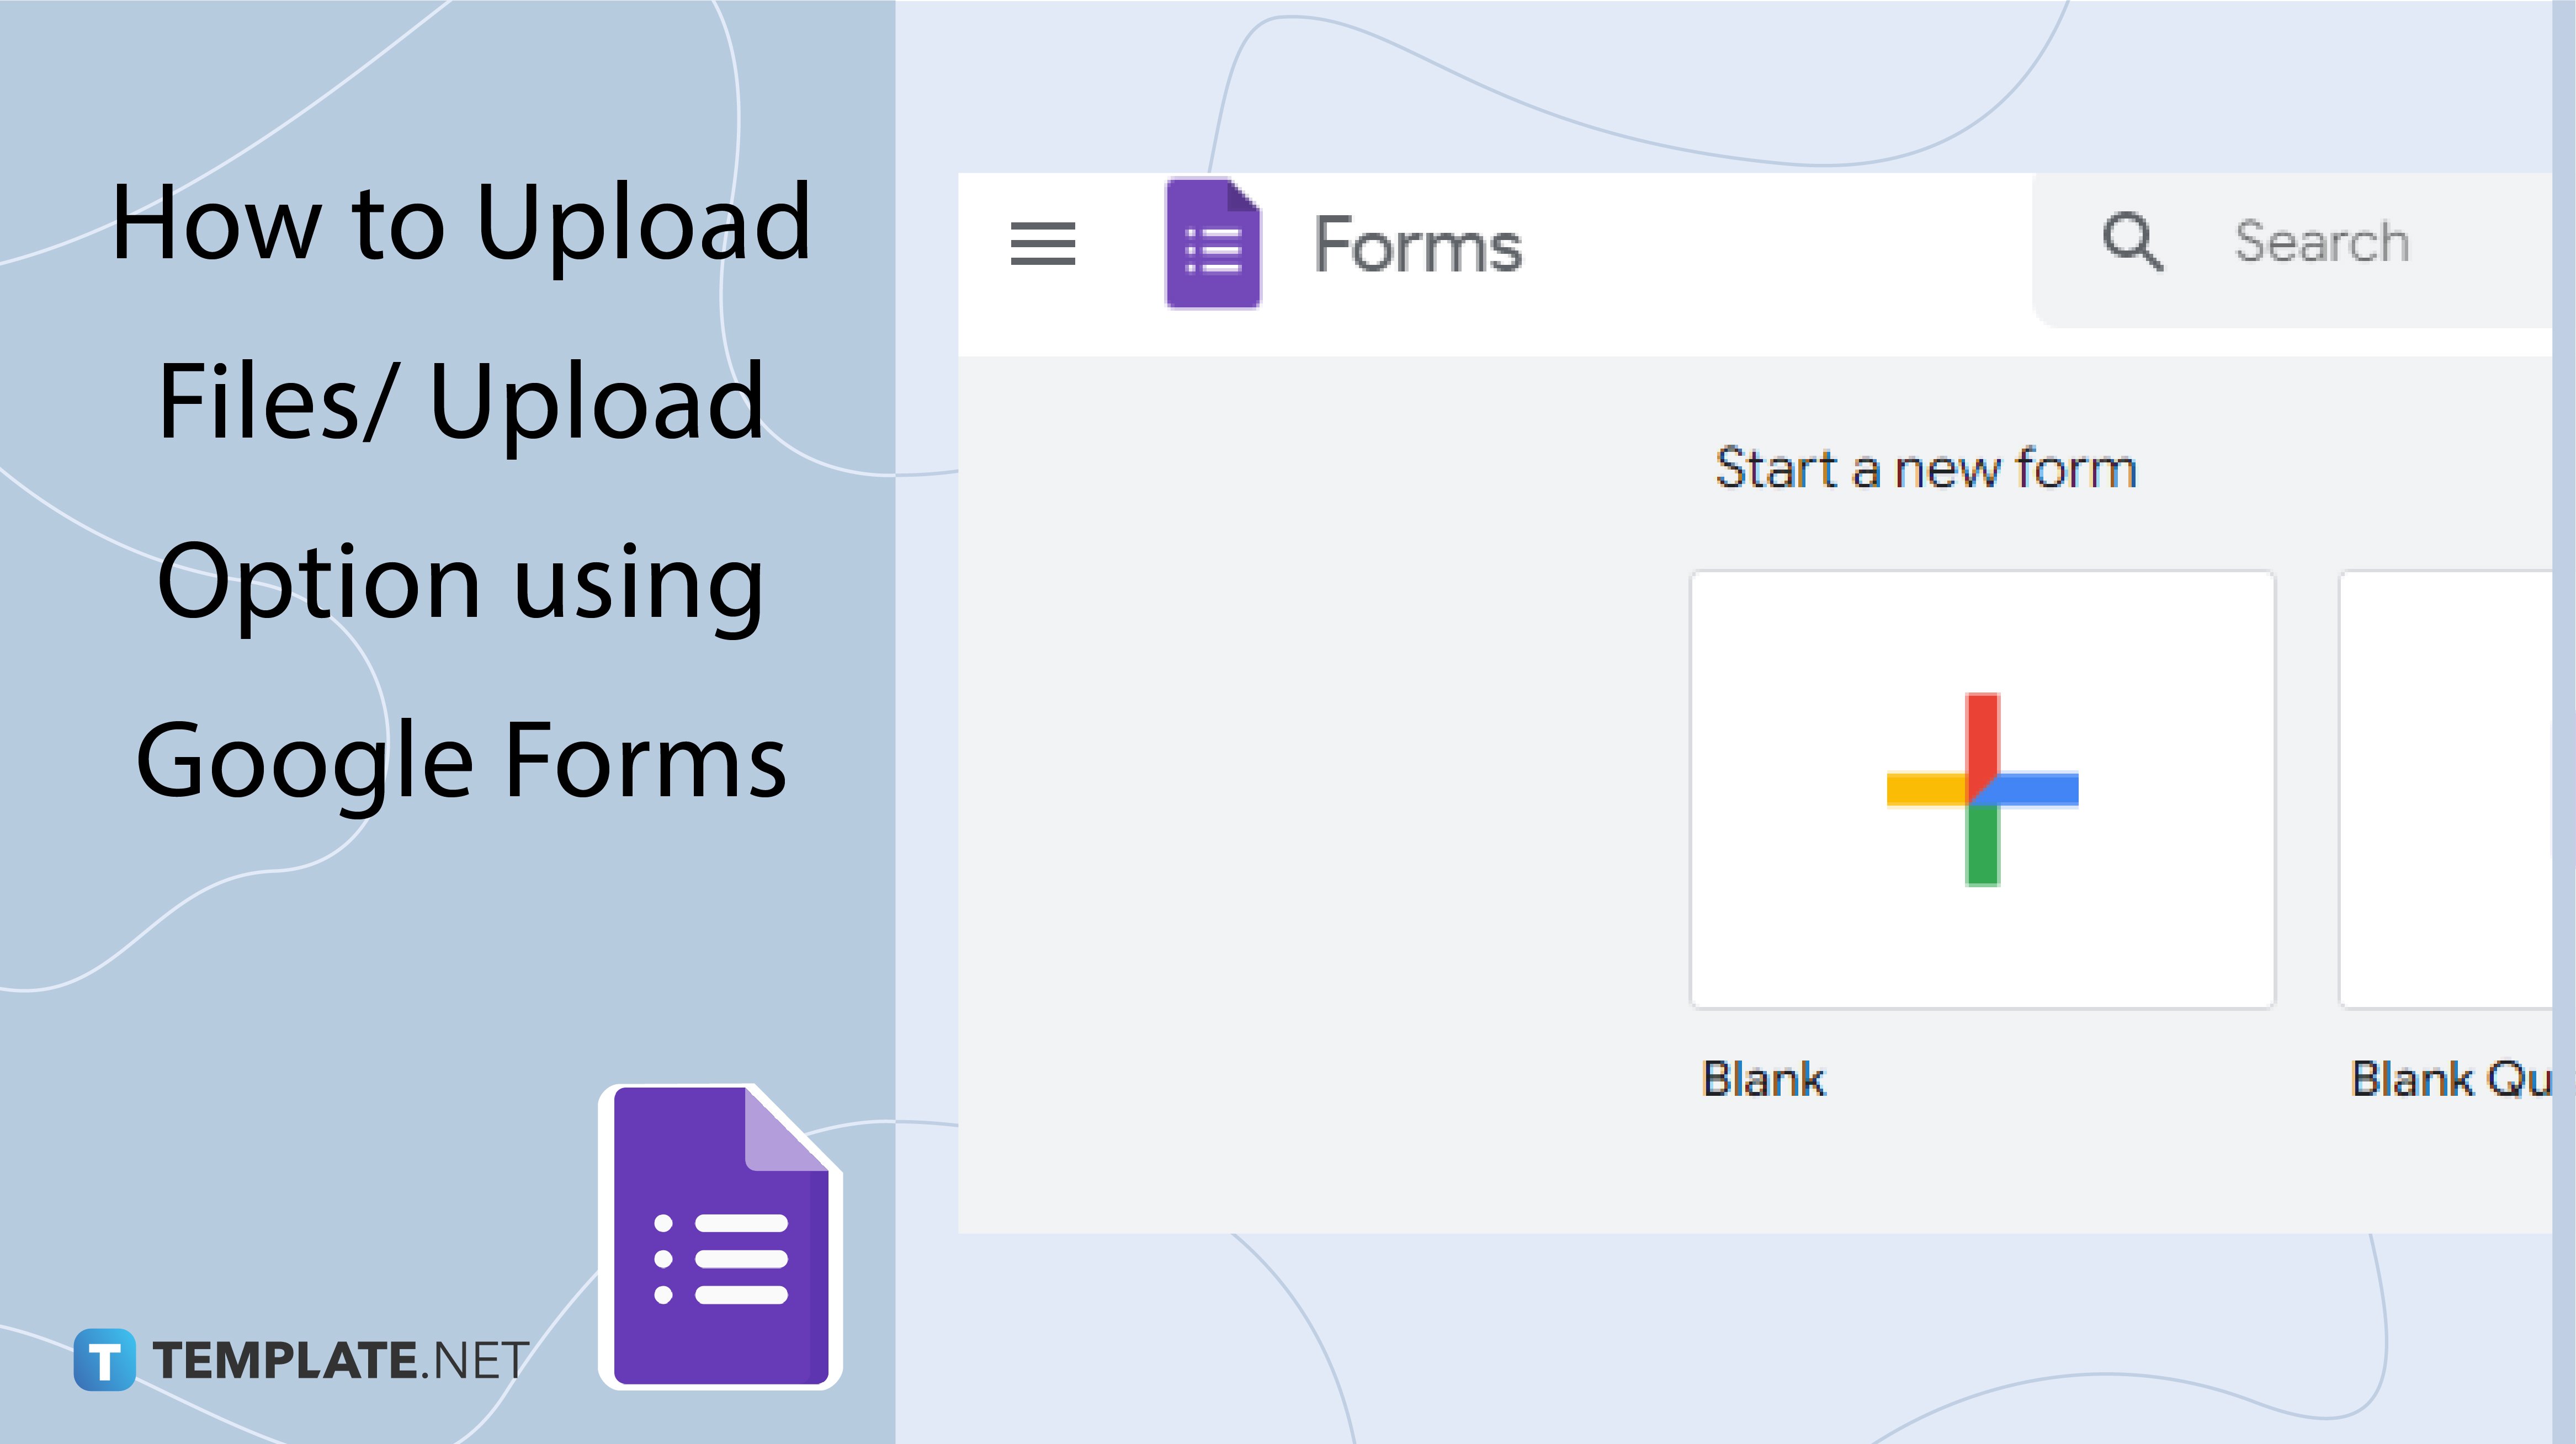 how-to-upload-files-upload-option-using-google-forms-01